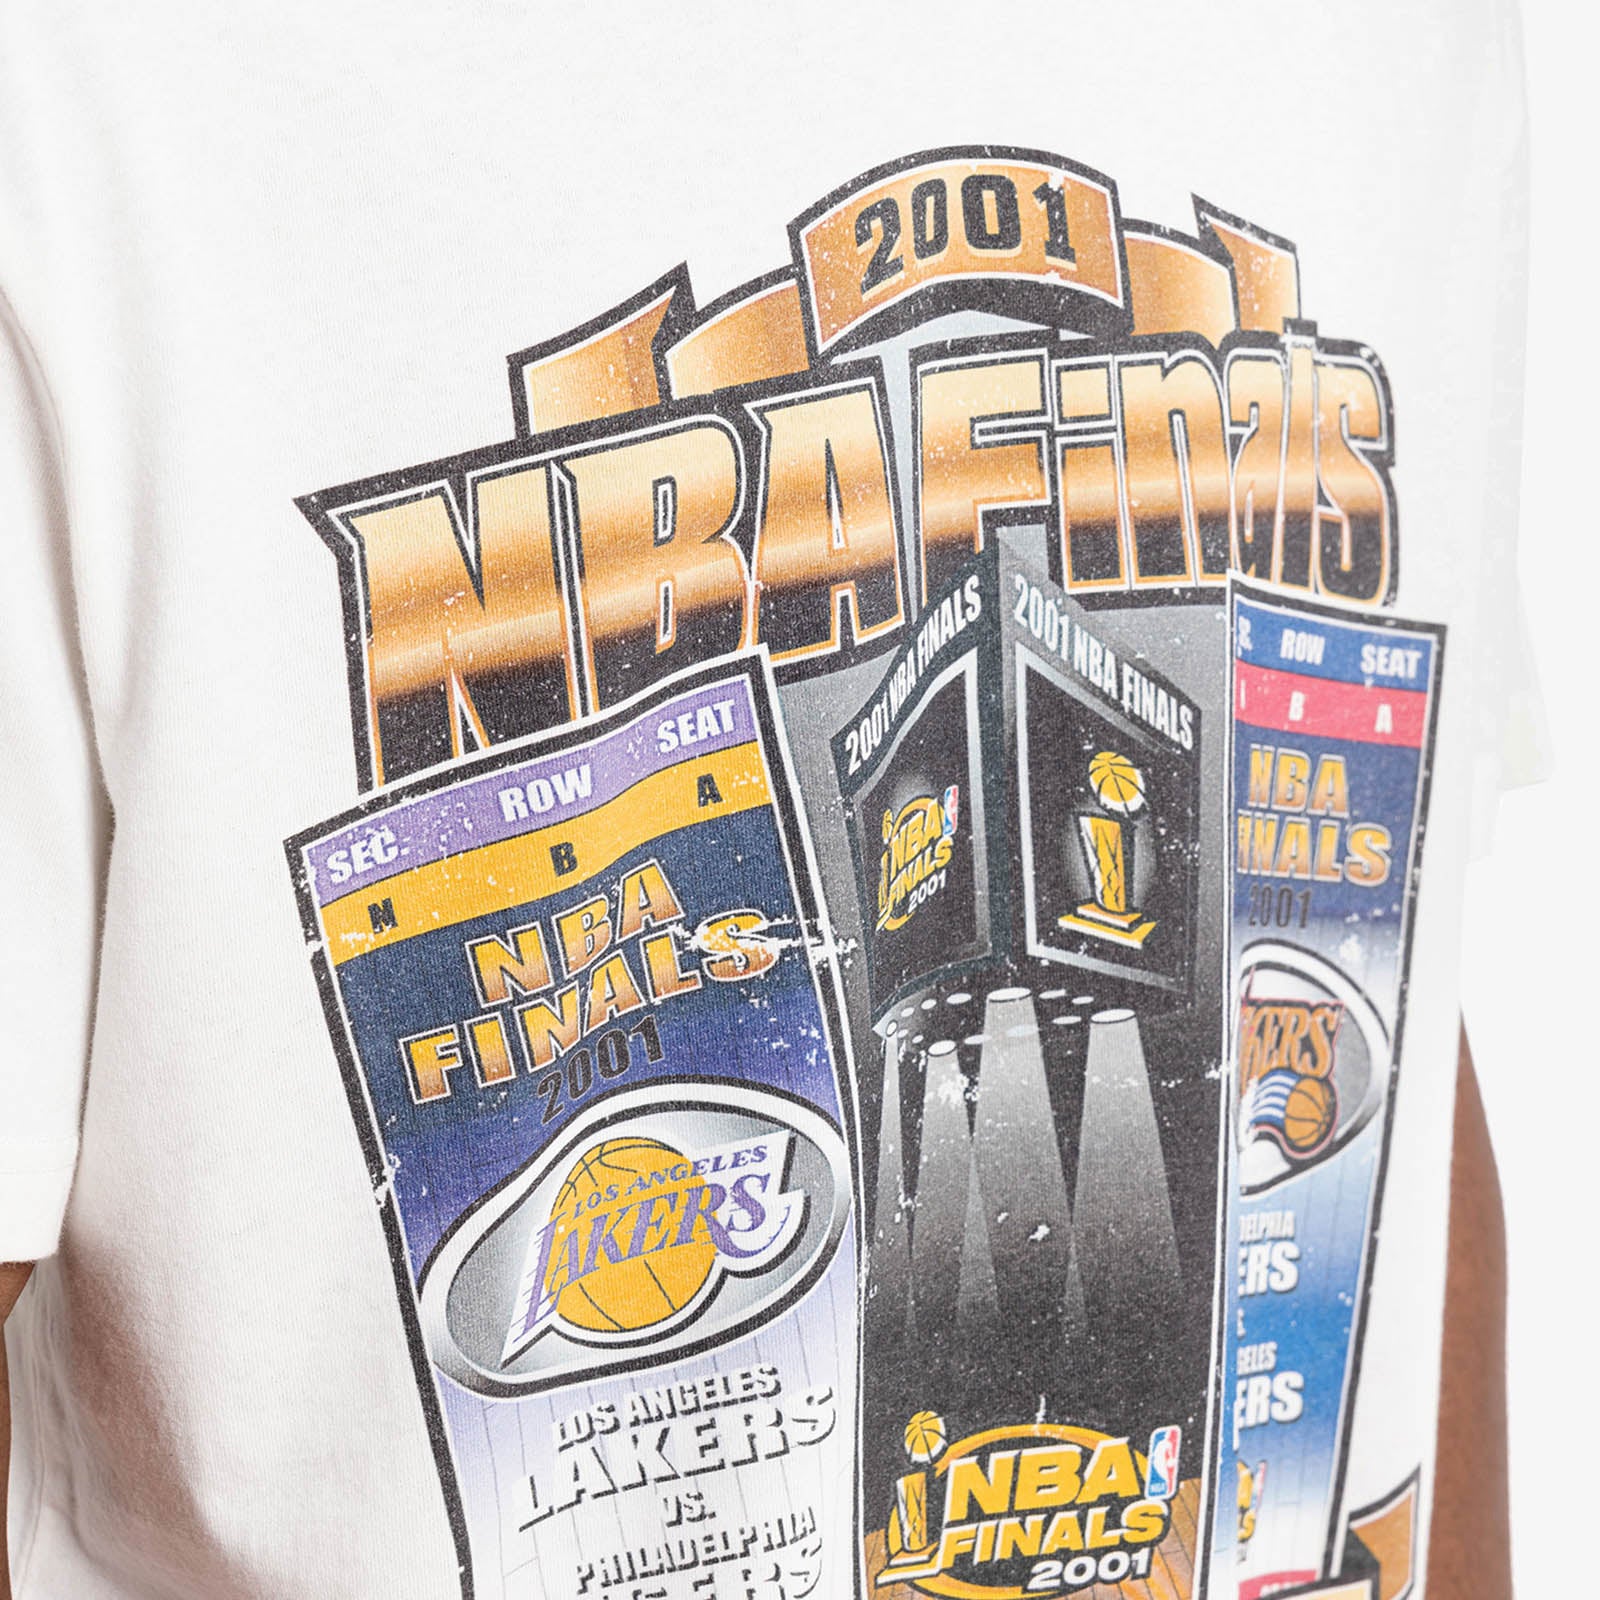 Lakers Vs 76ers NBA 2001 Finals Tee - Vintage White - Throwback